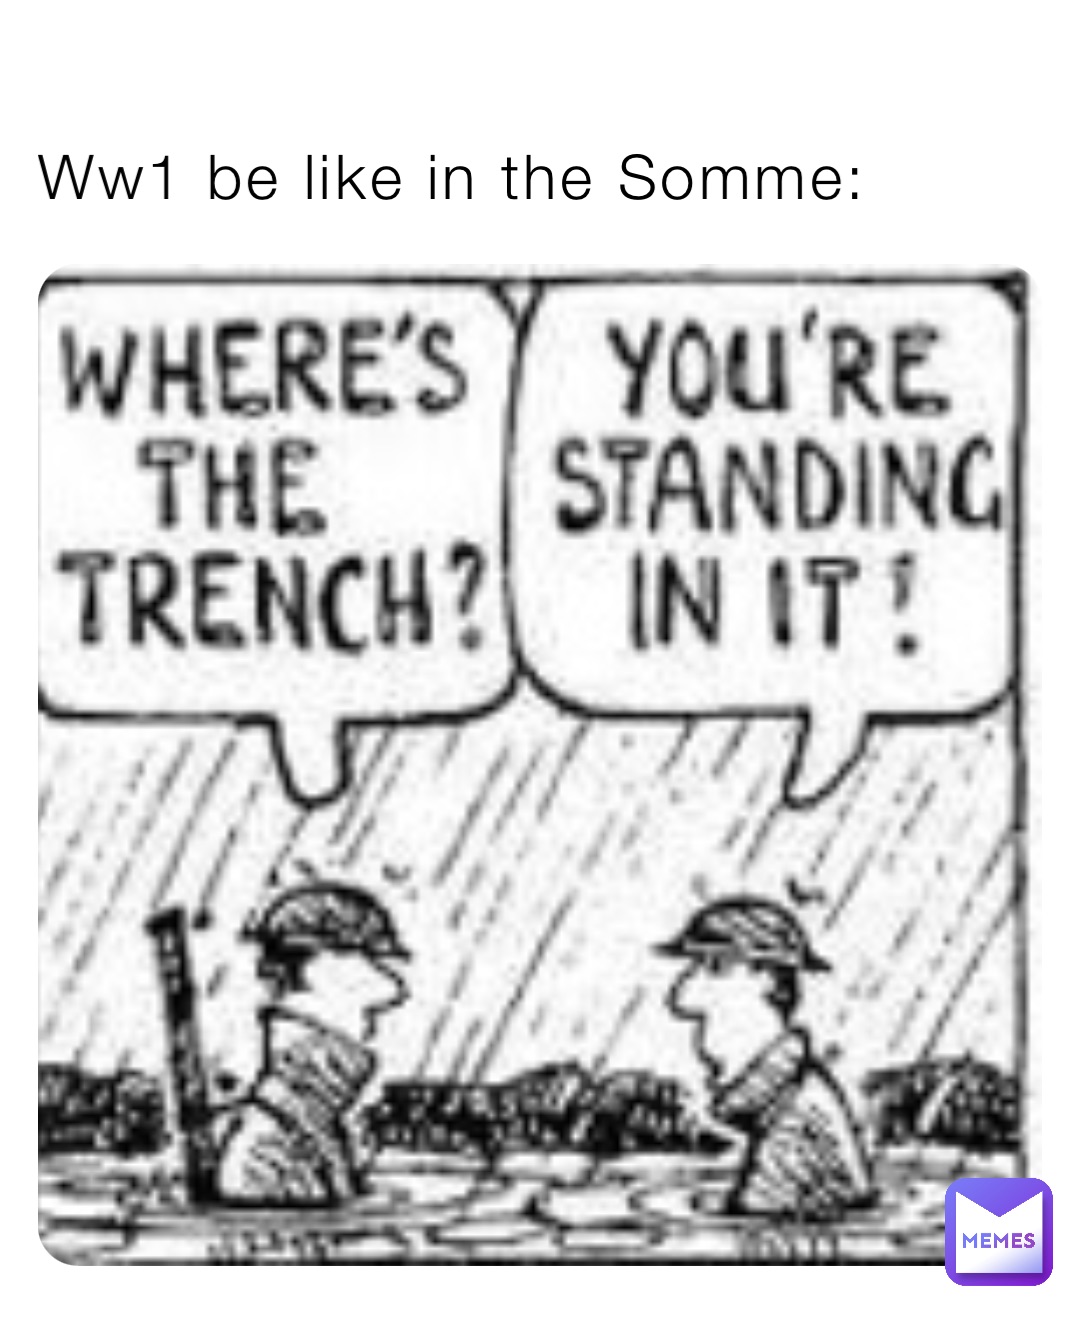 Ww1 be like in the Somme: